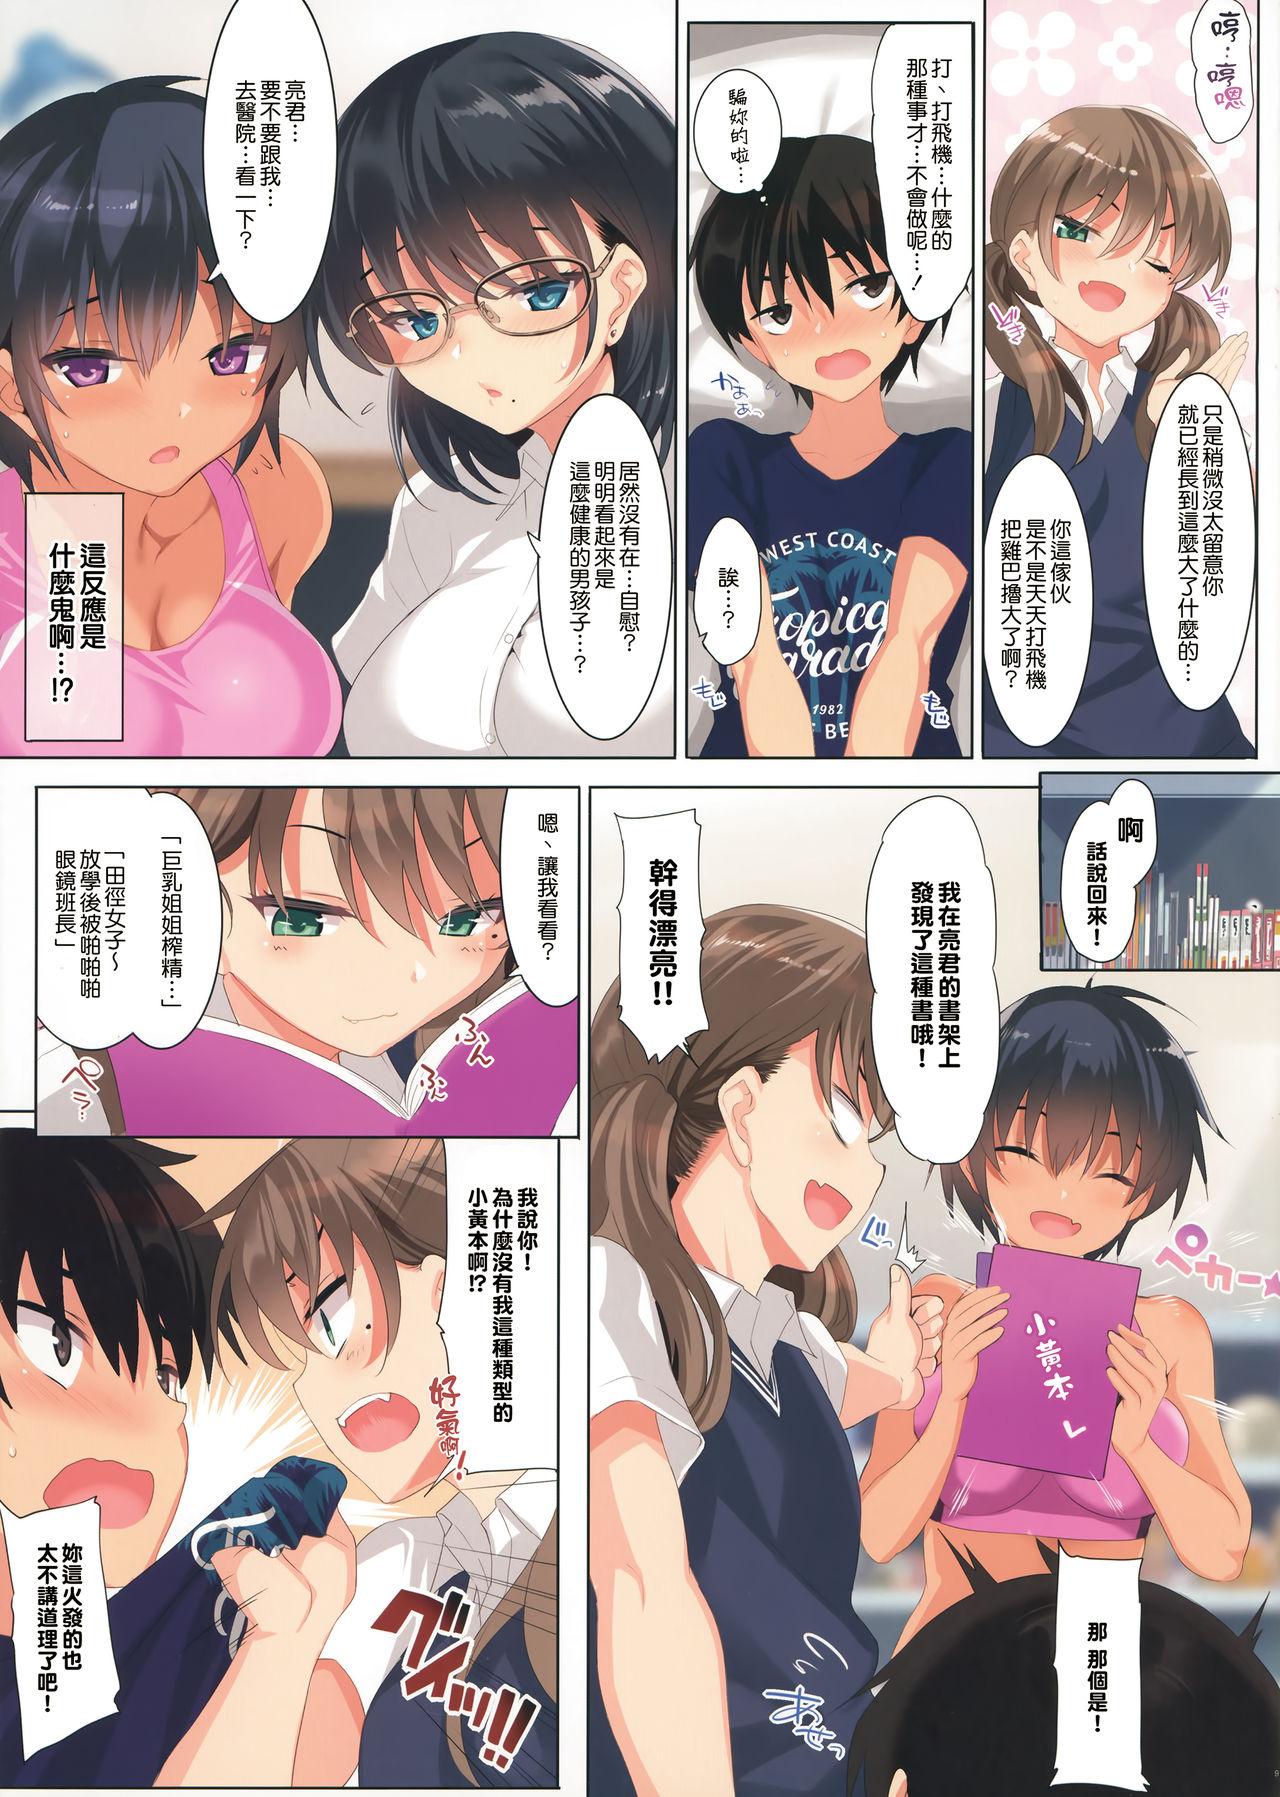 Big Pussy (C96) [clesta (Cle Masahiro)] CL-orc 01 Ane Zanmai - Three sister's harem [Chinese] [無邪気漢化組] [Decensored] - Original Party - Page 9